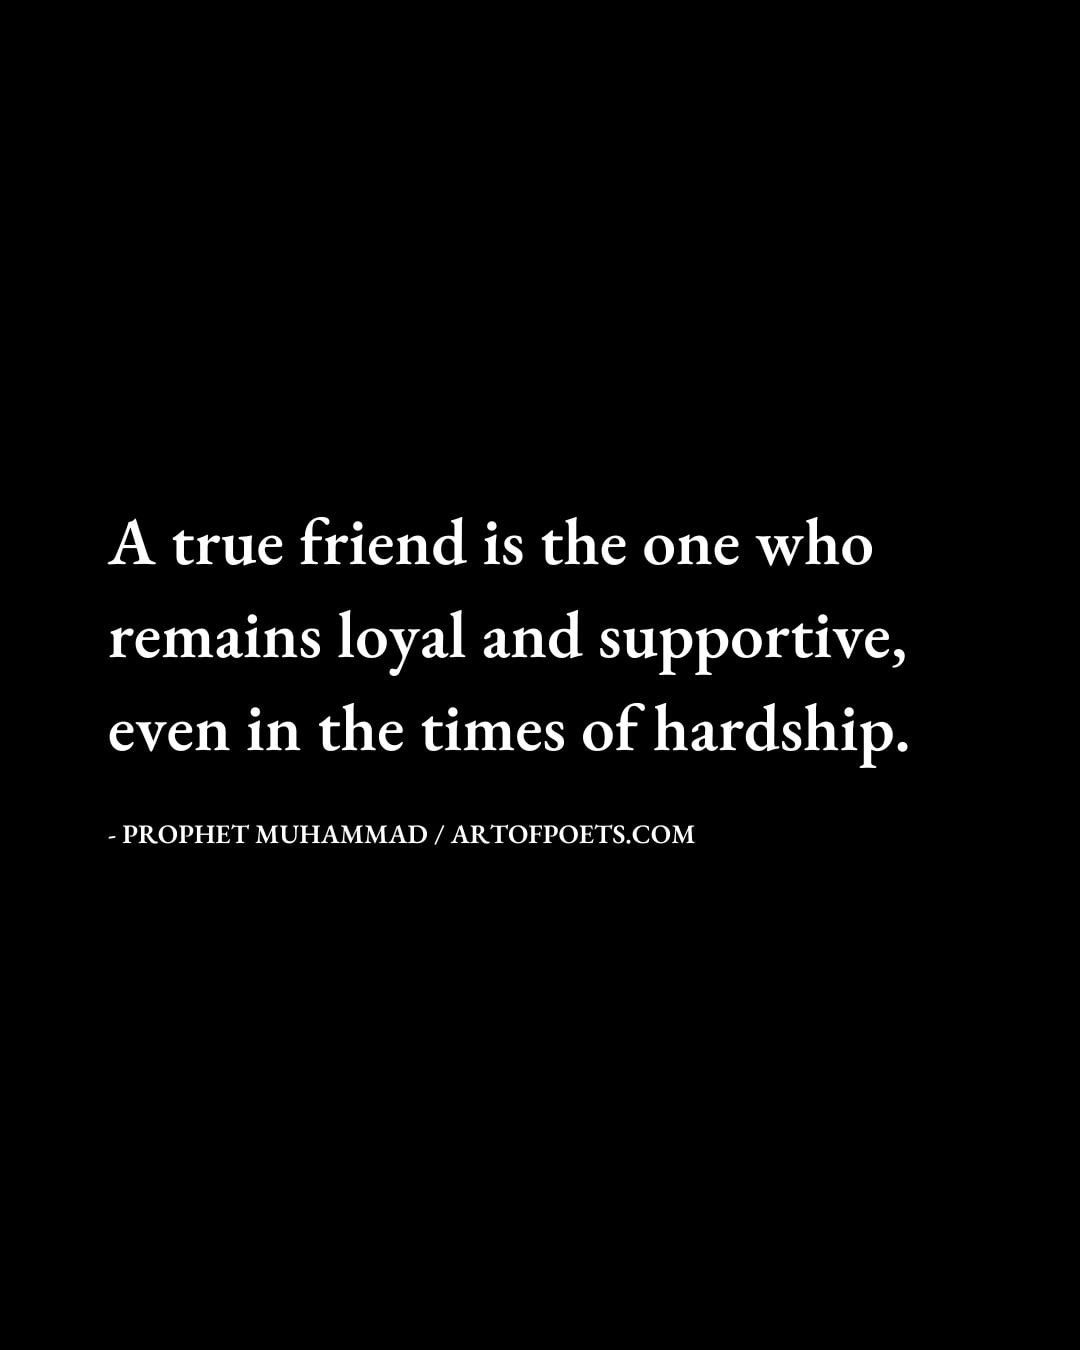 A true friend is the one who remains loyal and supportive even in the times of hardship